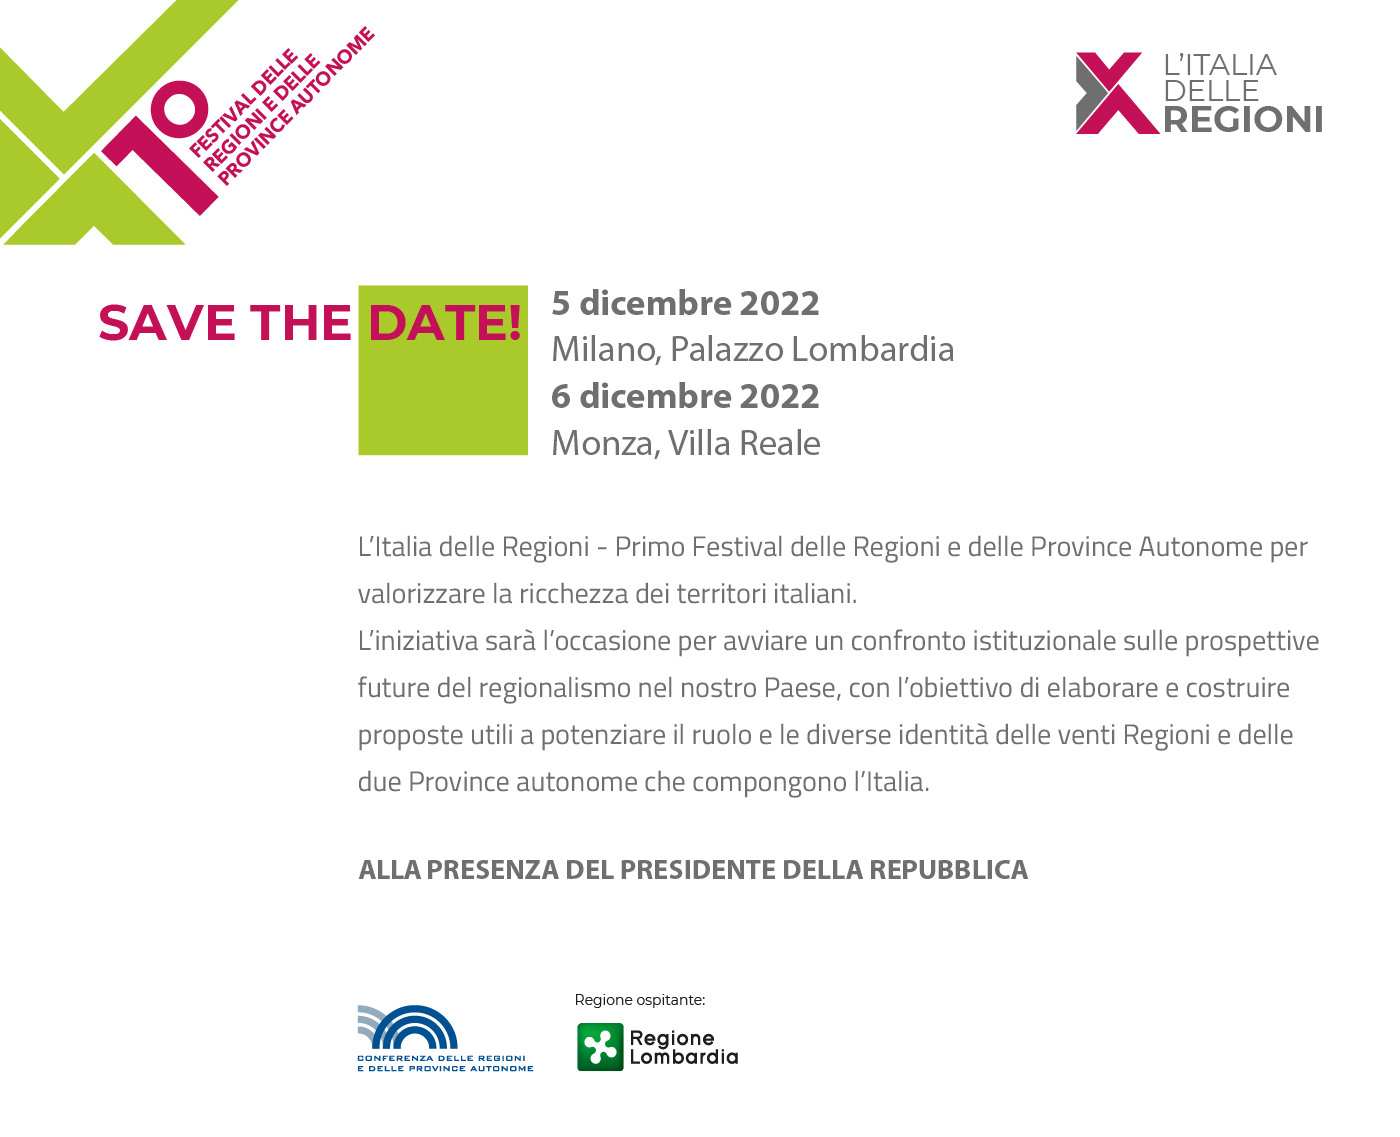 file/ELEMENTO_NEWSLETTER/24937/Save-the-date_UFFICIALE_festival_regioni_5_6_12_22_NL.png